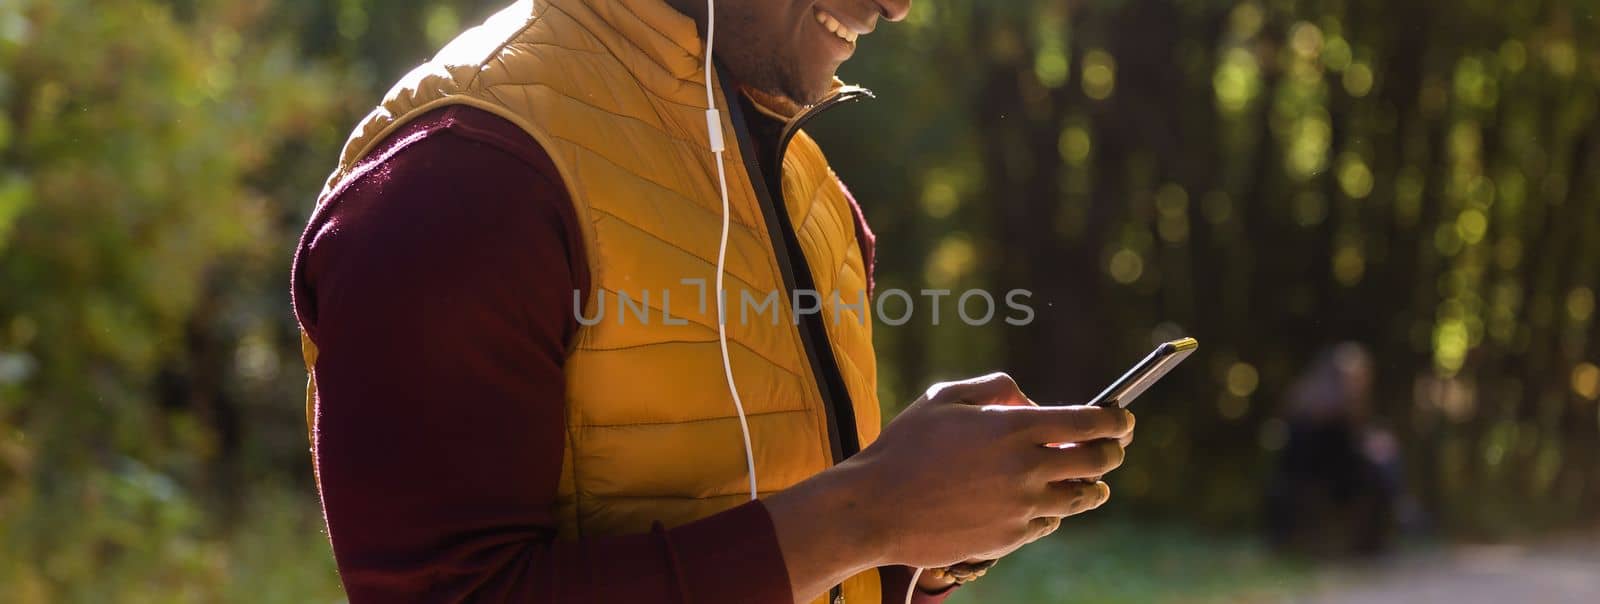 African american man using cellphone applications texting message in messengers, male black hands holding phone working playing game on smartphone, mobile technology lifestyle, close up view